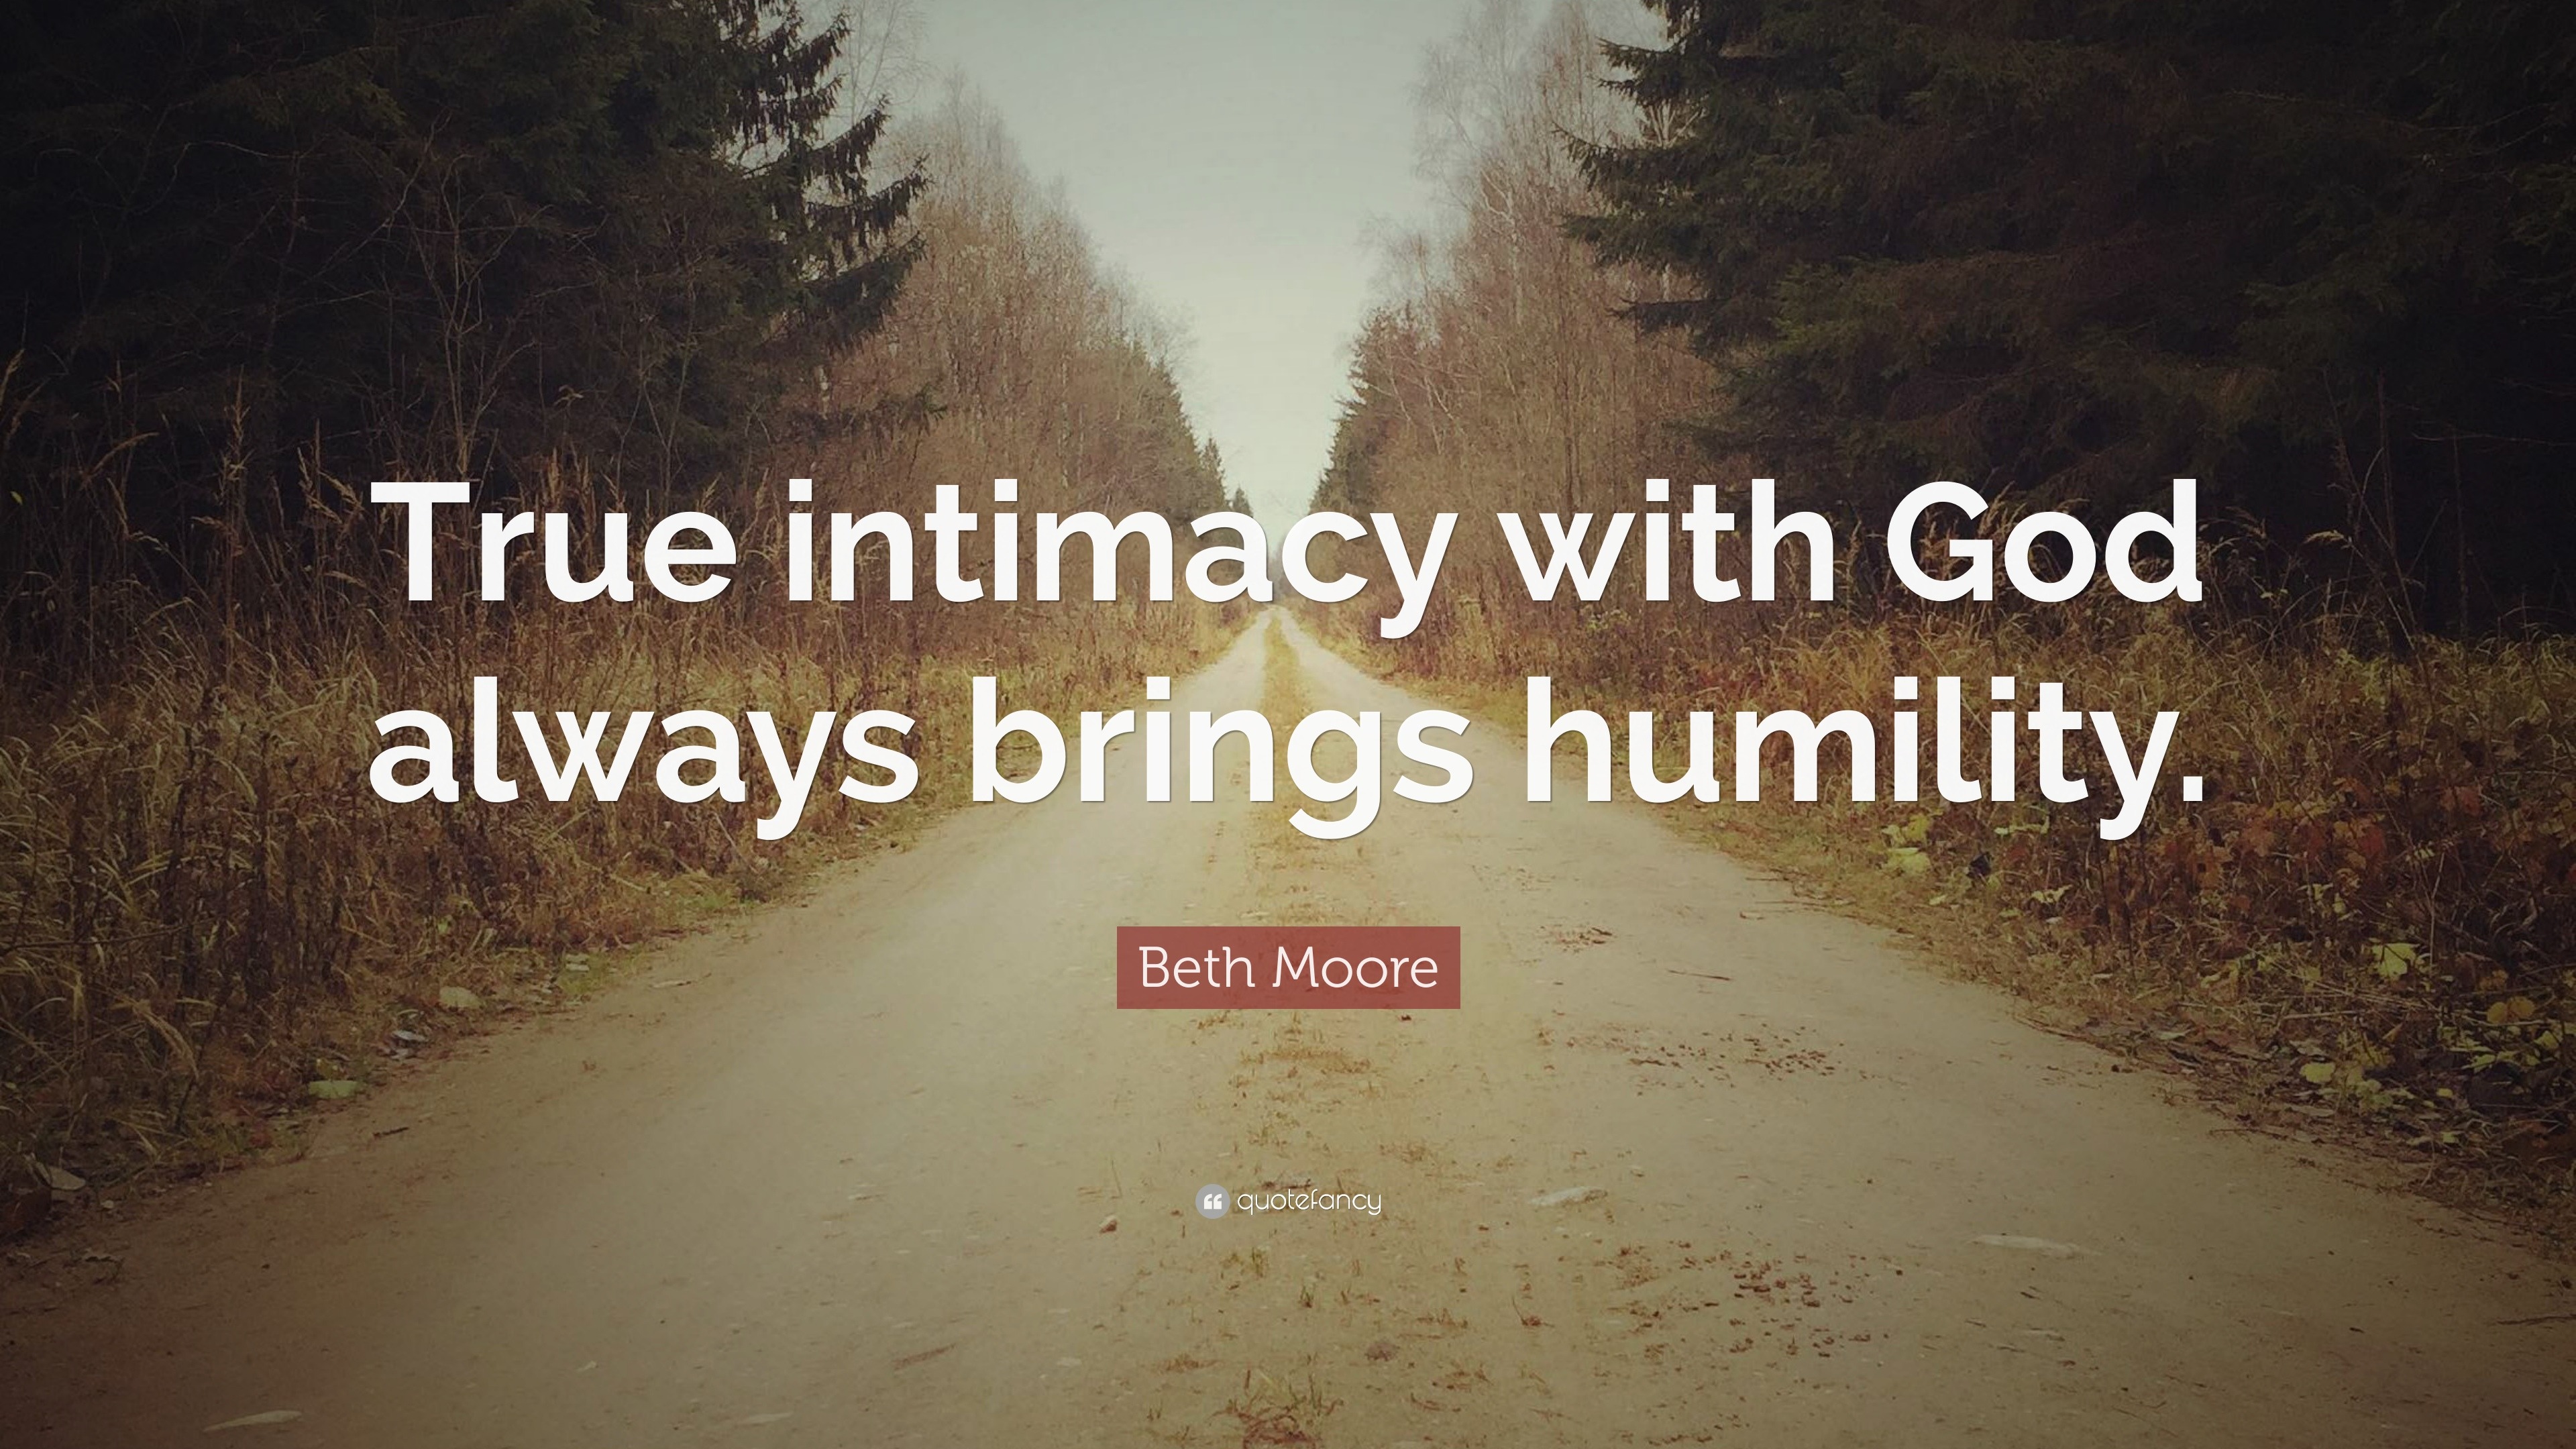 beth moore quote: "true intimacy with god always brings humility